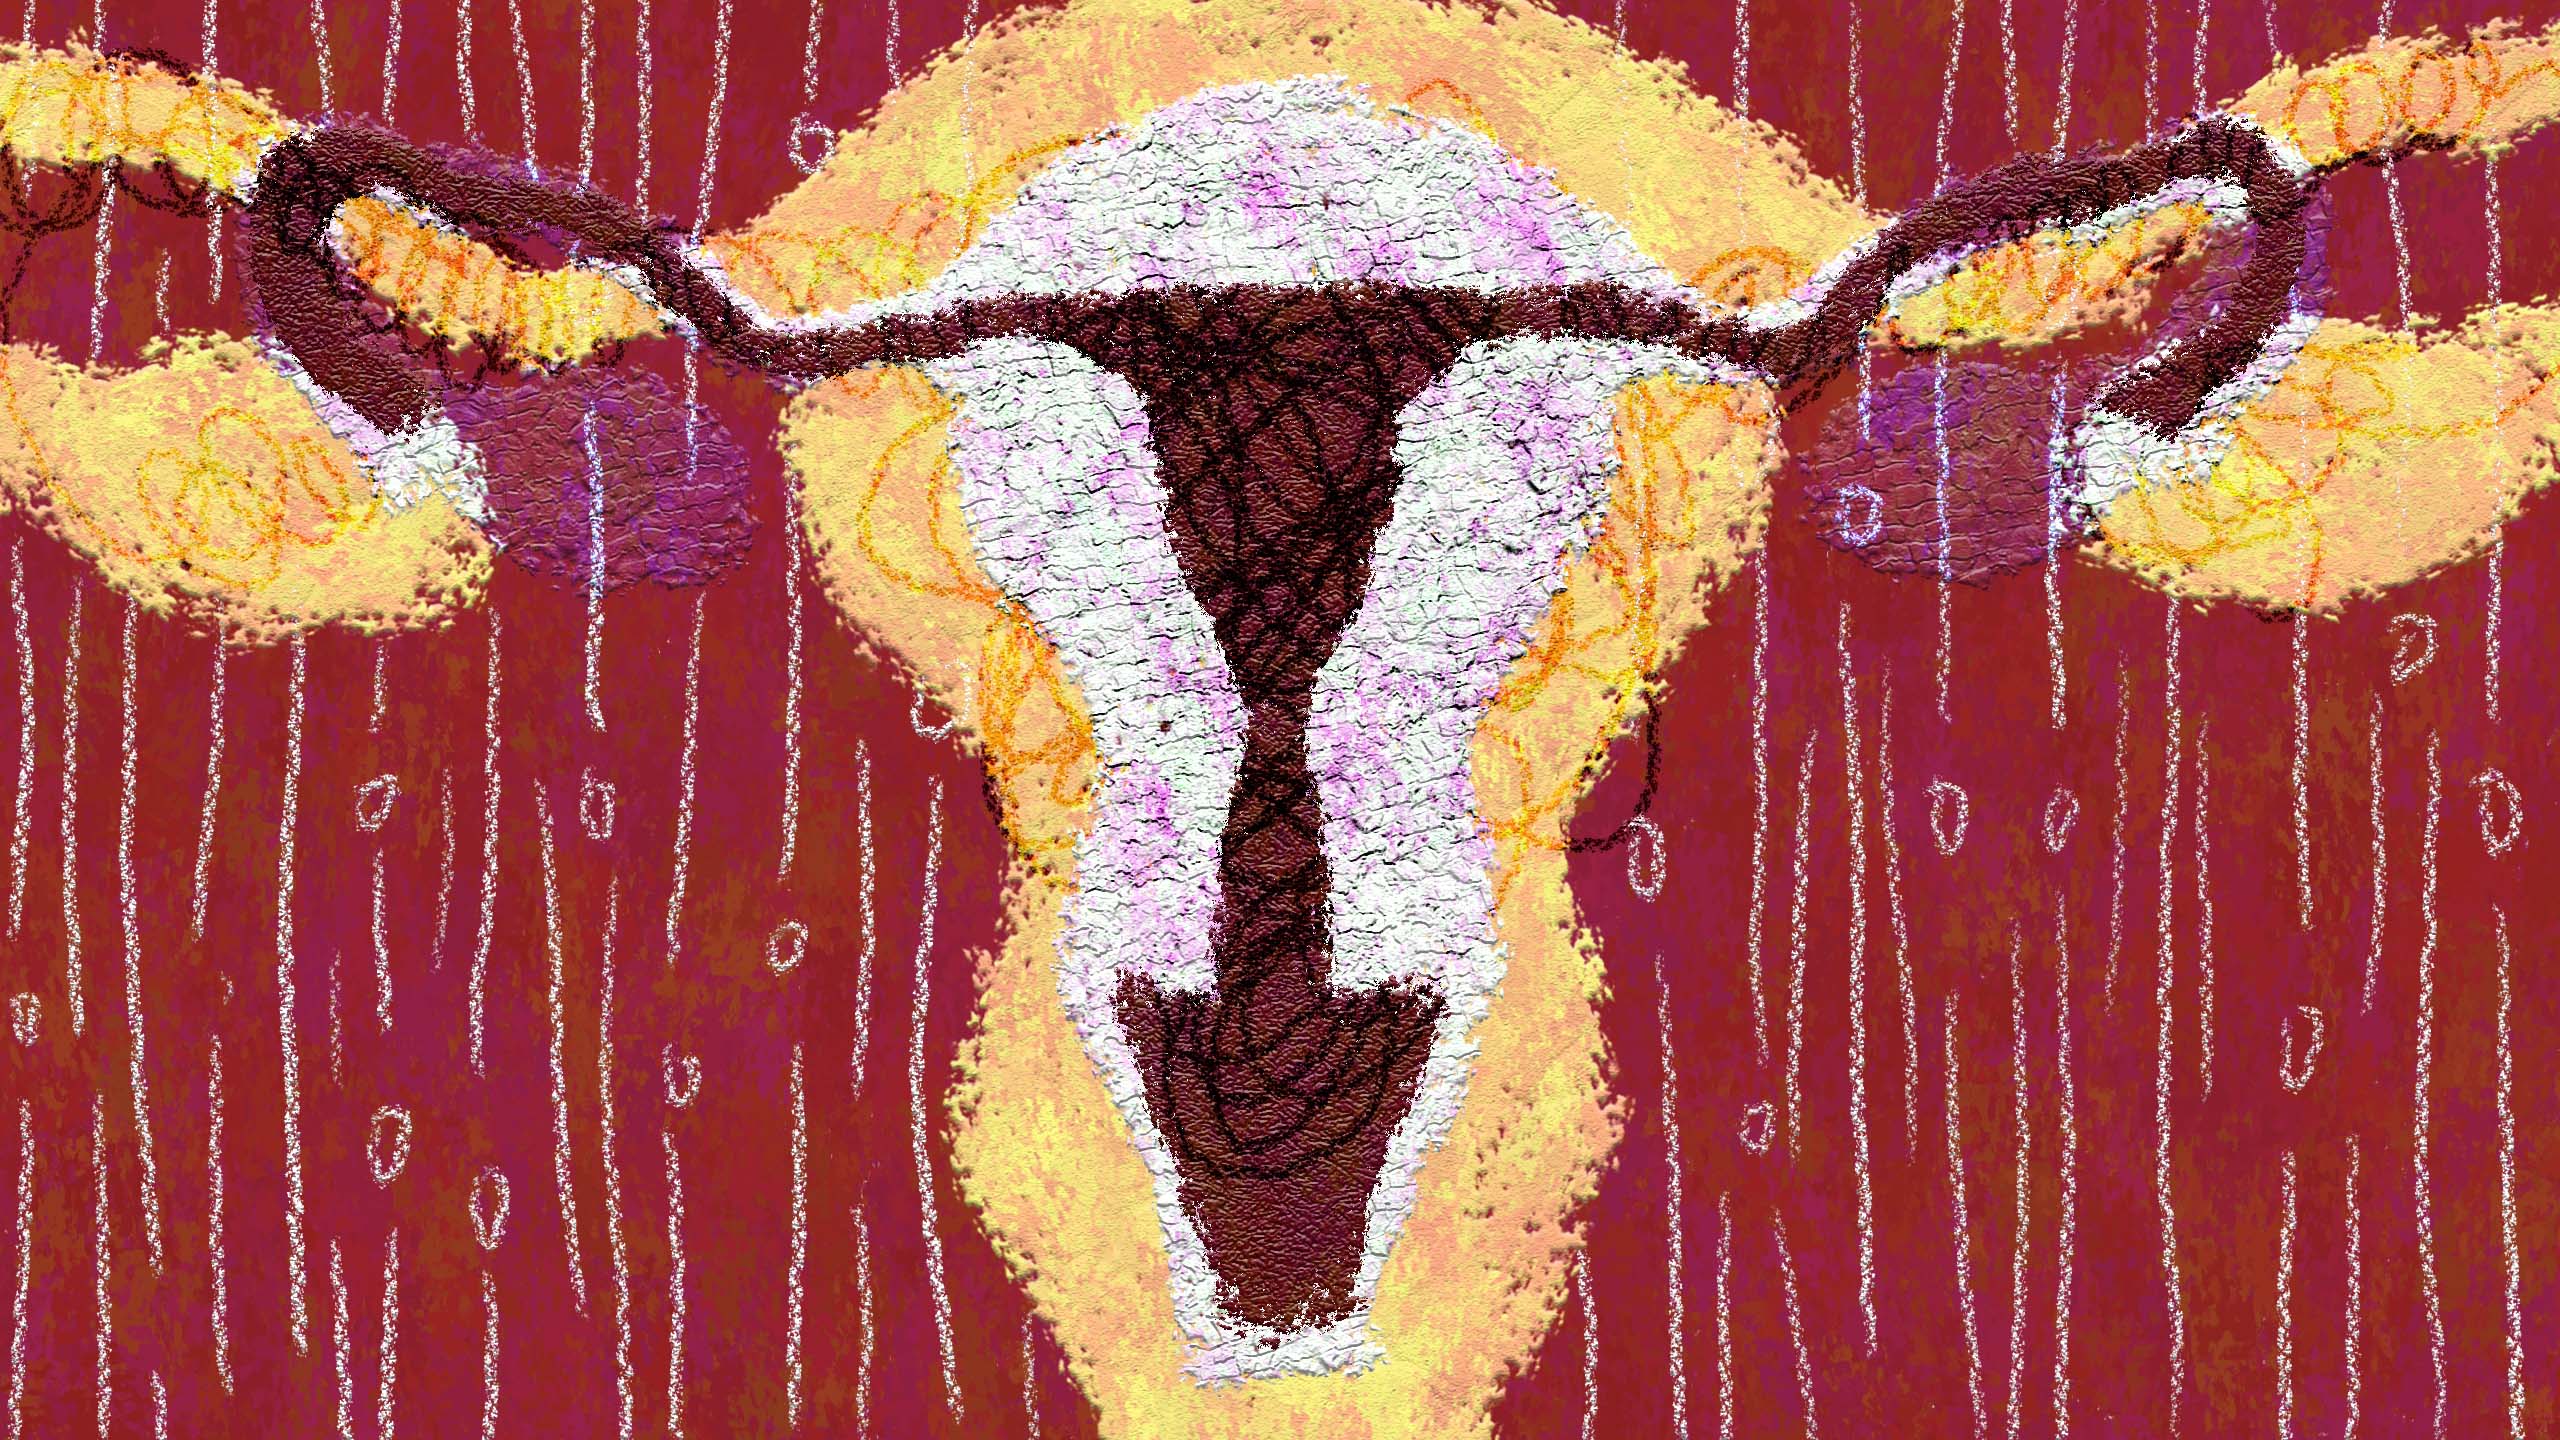 the shape of a uterus and ovaries against red background